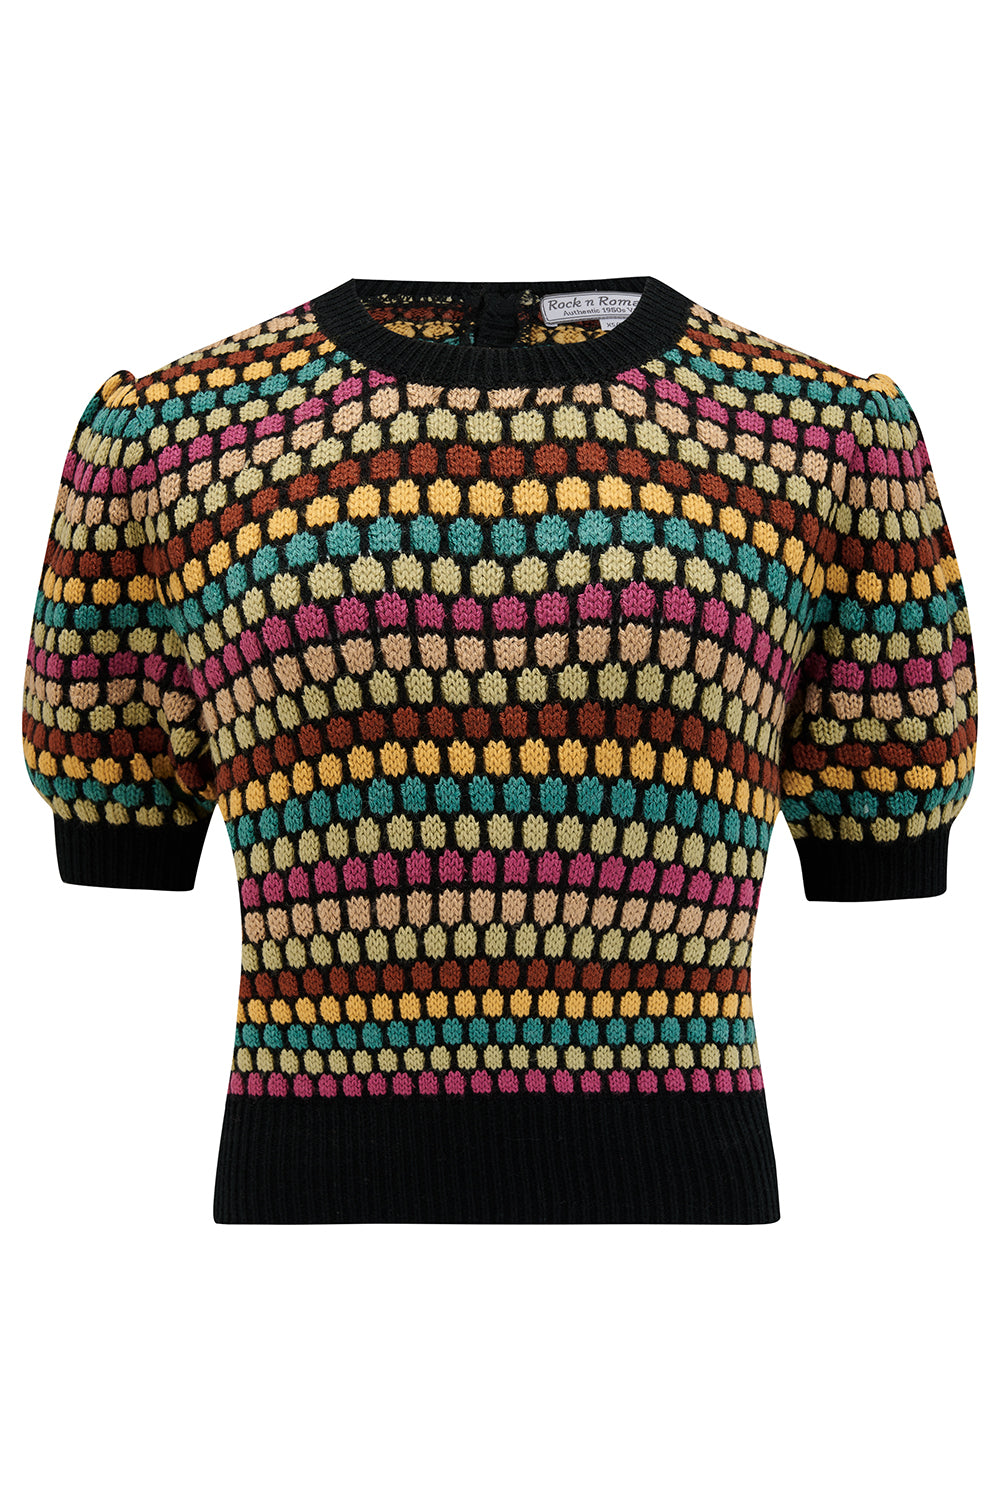 The "Claudette" Short Sleeve Pullover Jumper in Multi Colour Knit, Classic 1940s & 50s Vintage Style product